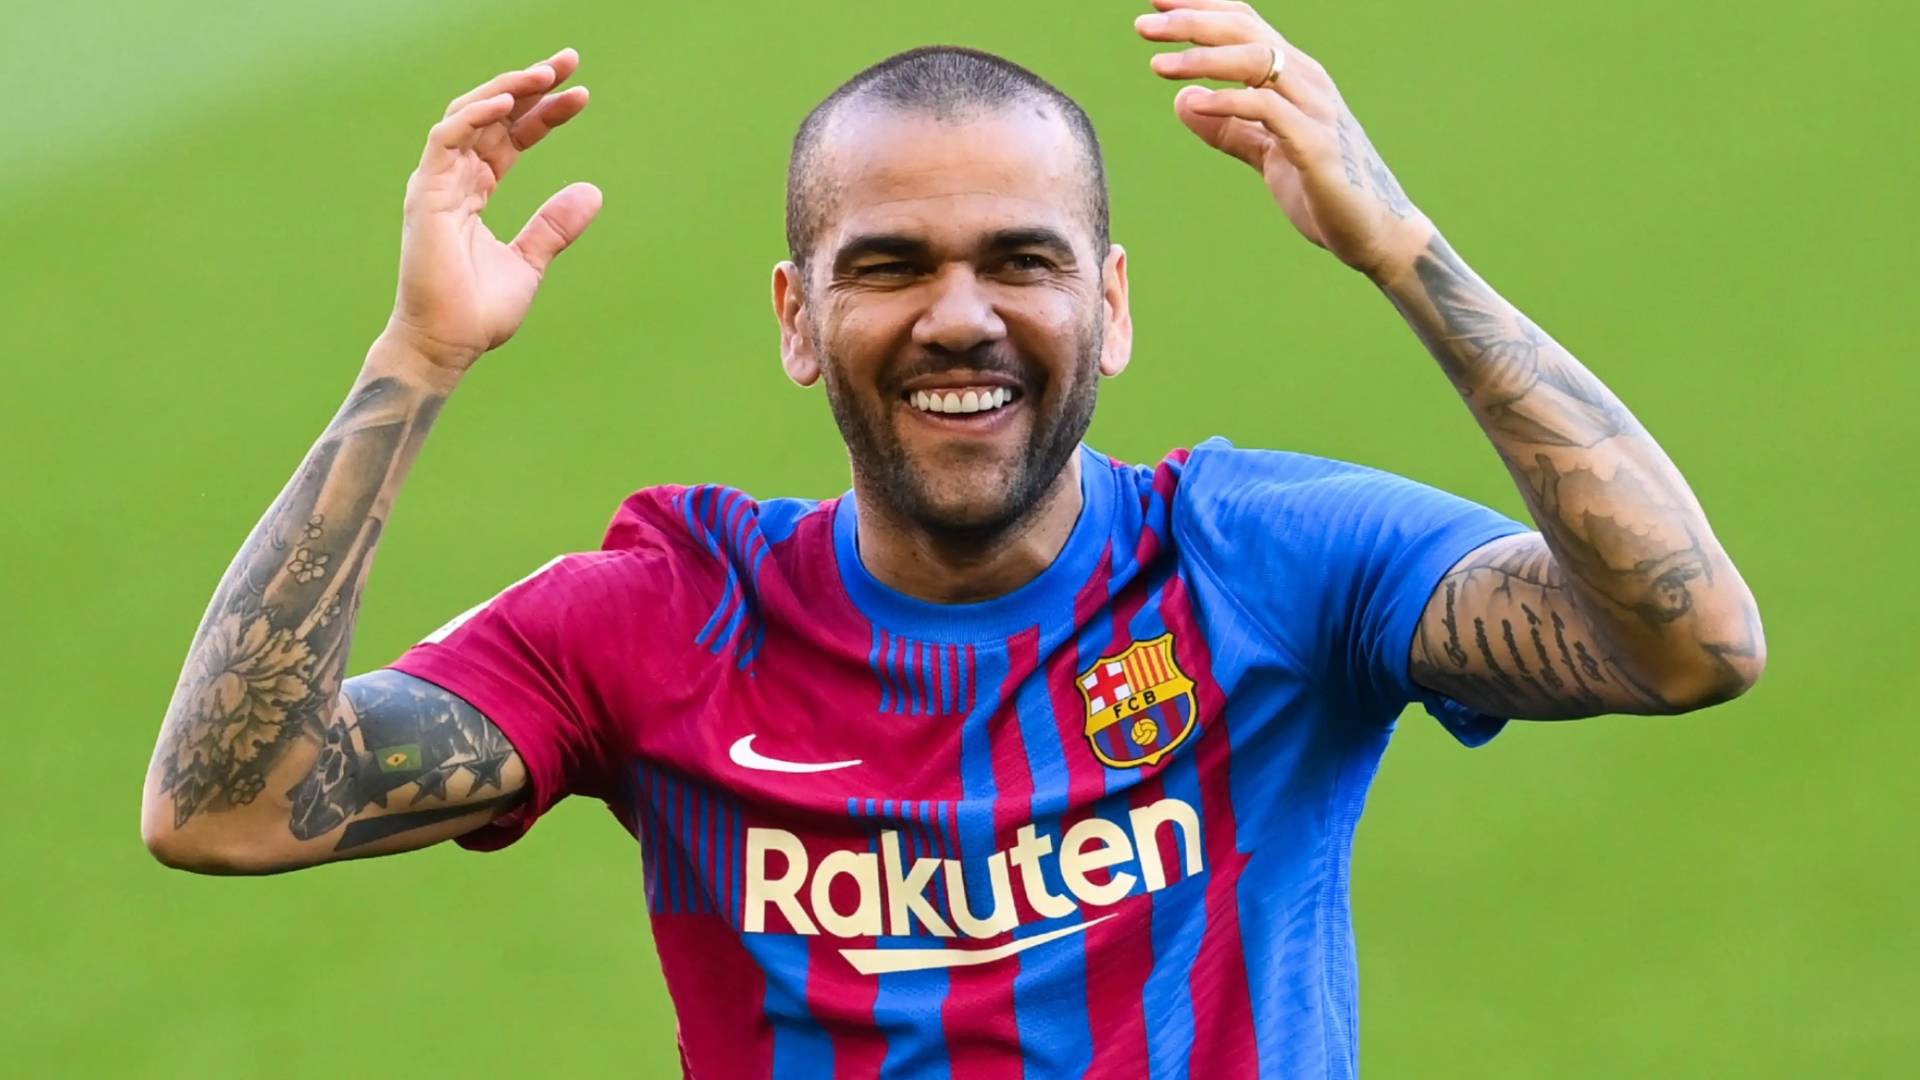 Spanish court sets $1.1 mln bail for Dani Alves to be released from prison